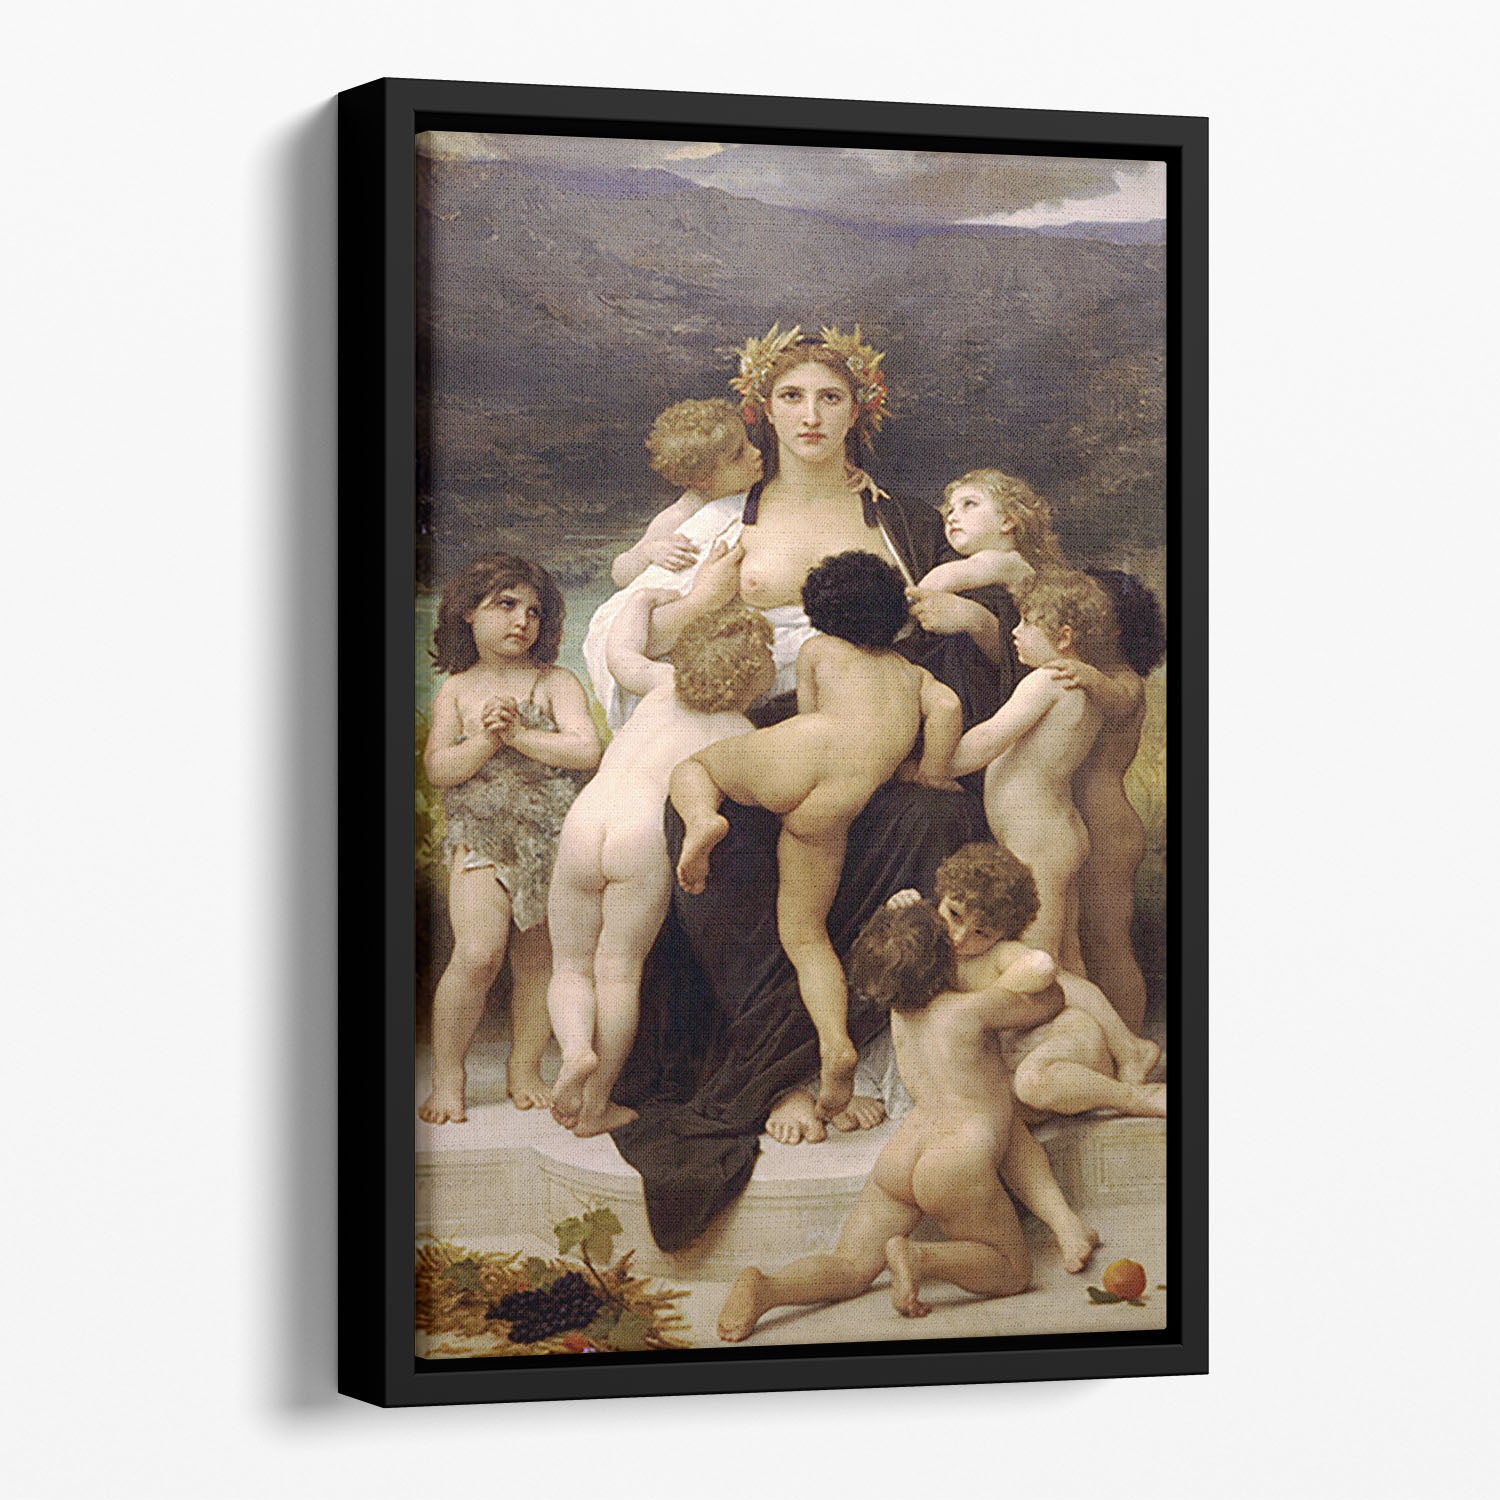 The Motherland By Bouguereau Floating Framed Canvas